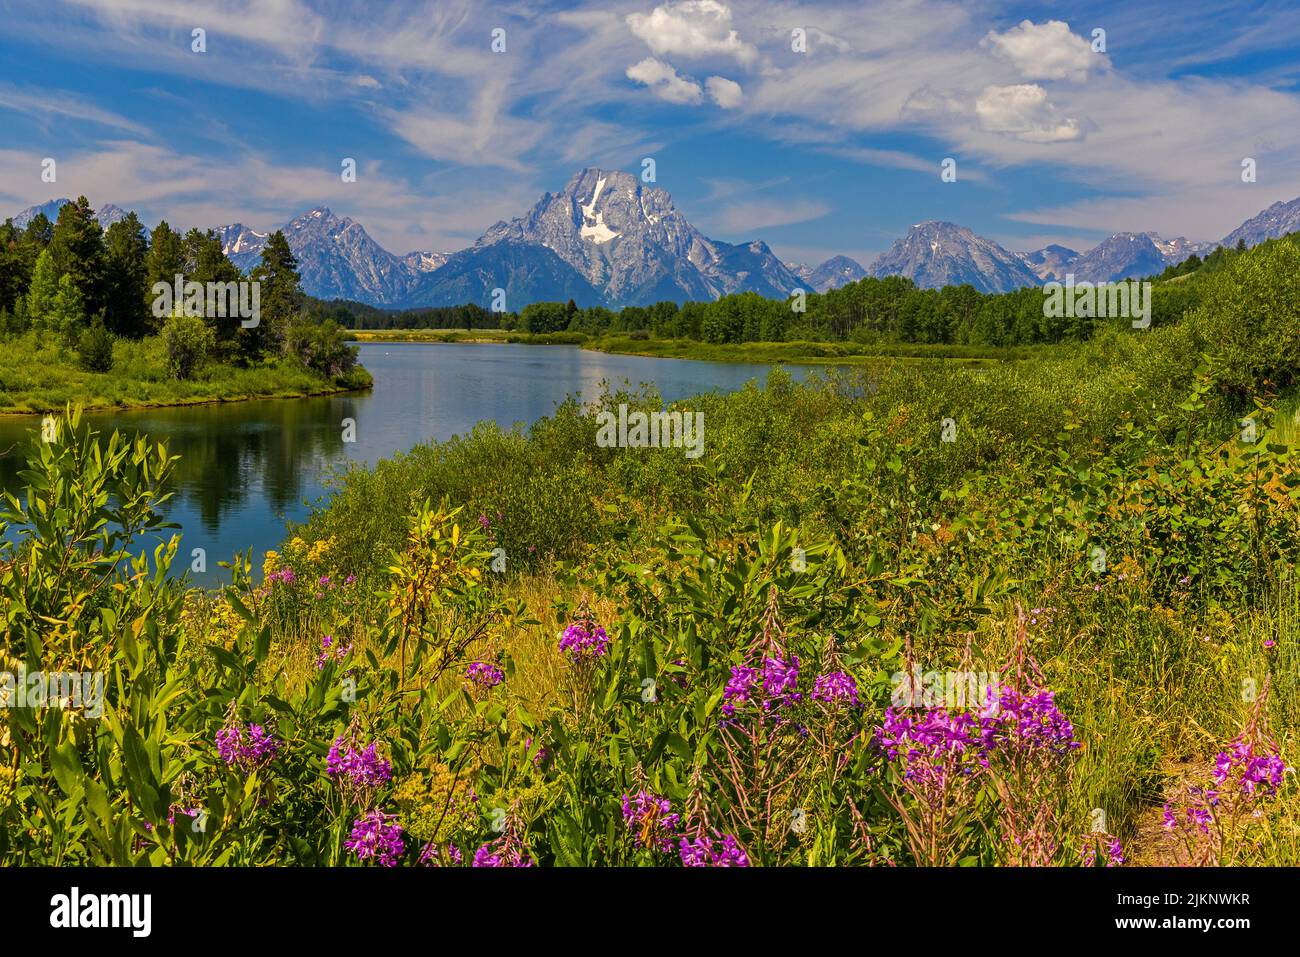 Fireweed (Chamerion angustifolium) in the foreground and Mt Moran in the distance from the Oxbow Bend of the Snake River in Grand Teton NP, WY. Stock Photo